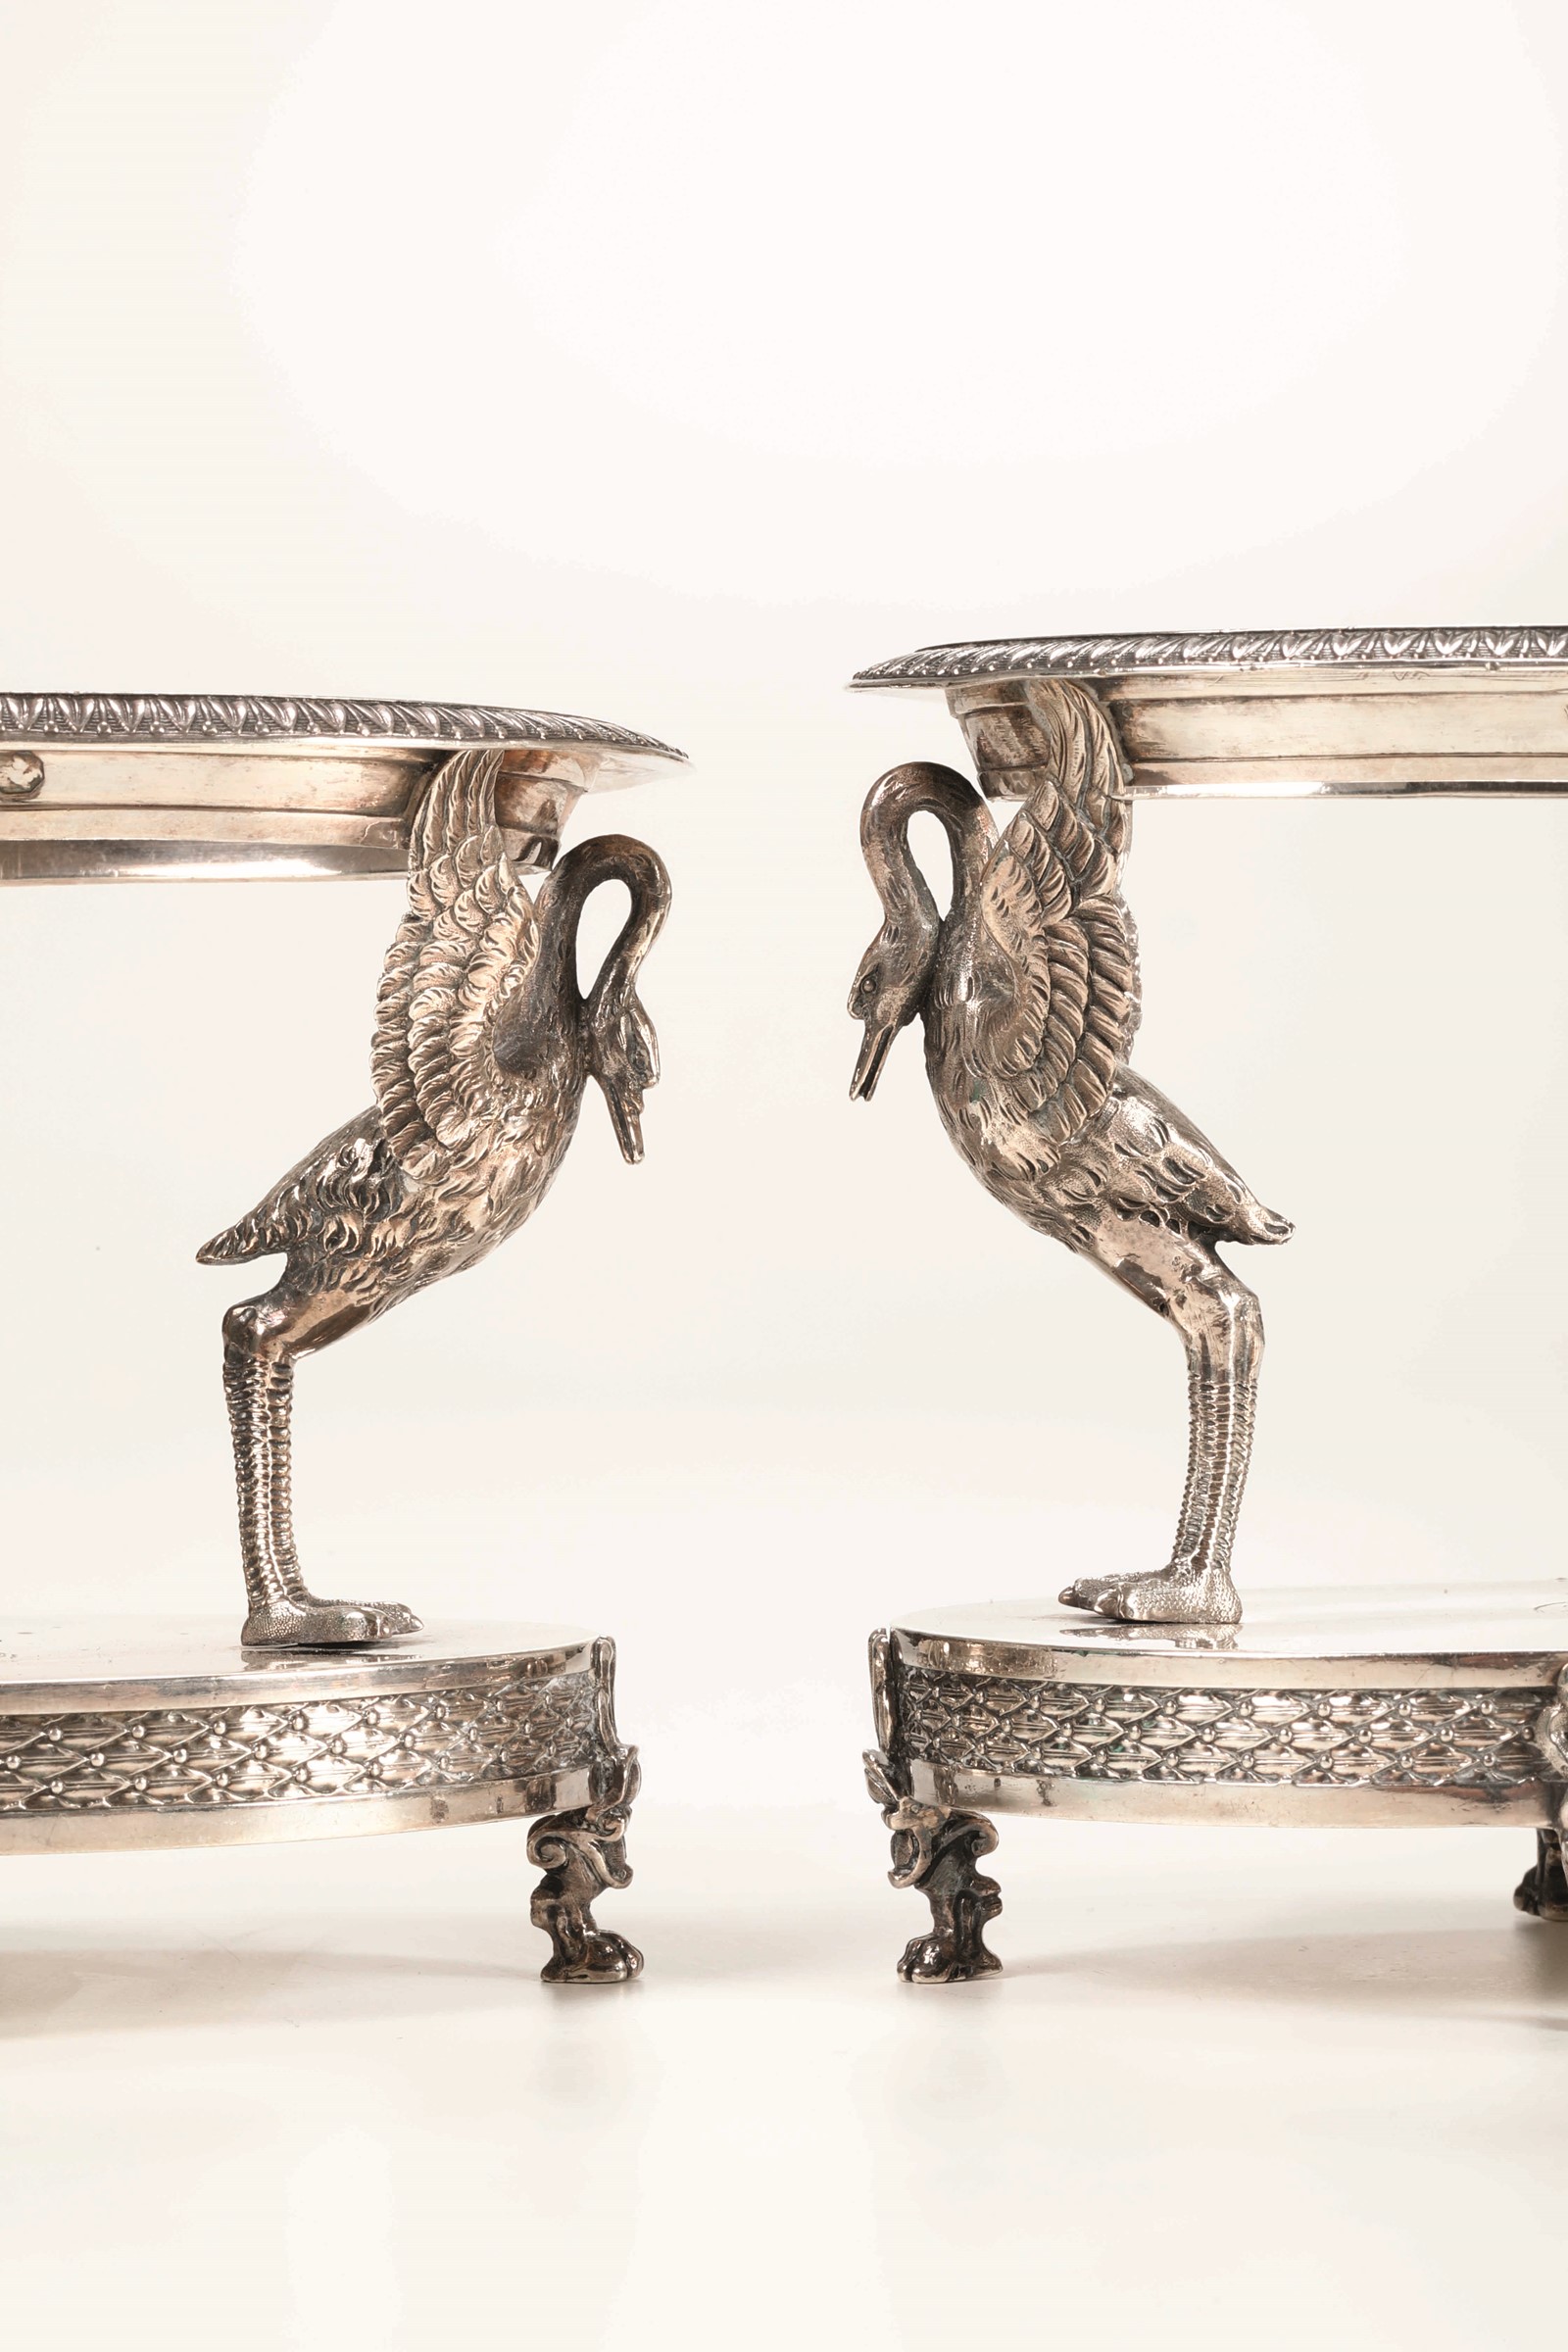 Six salt cellars, MG Biennais, Paris early 1800s - First title molten, embossed and [...] - Image 2 of 10